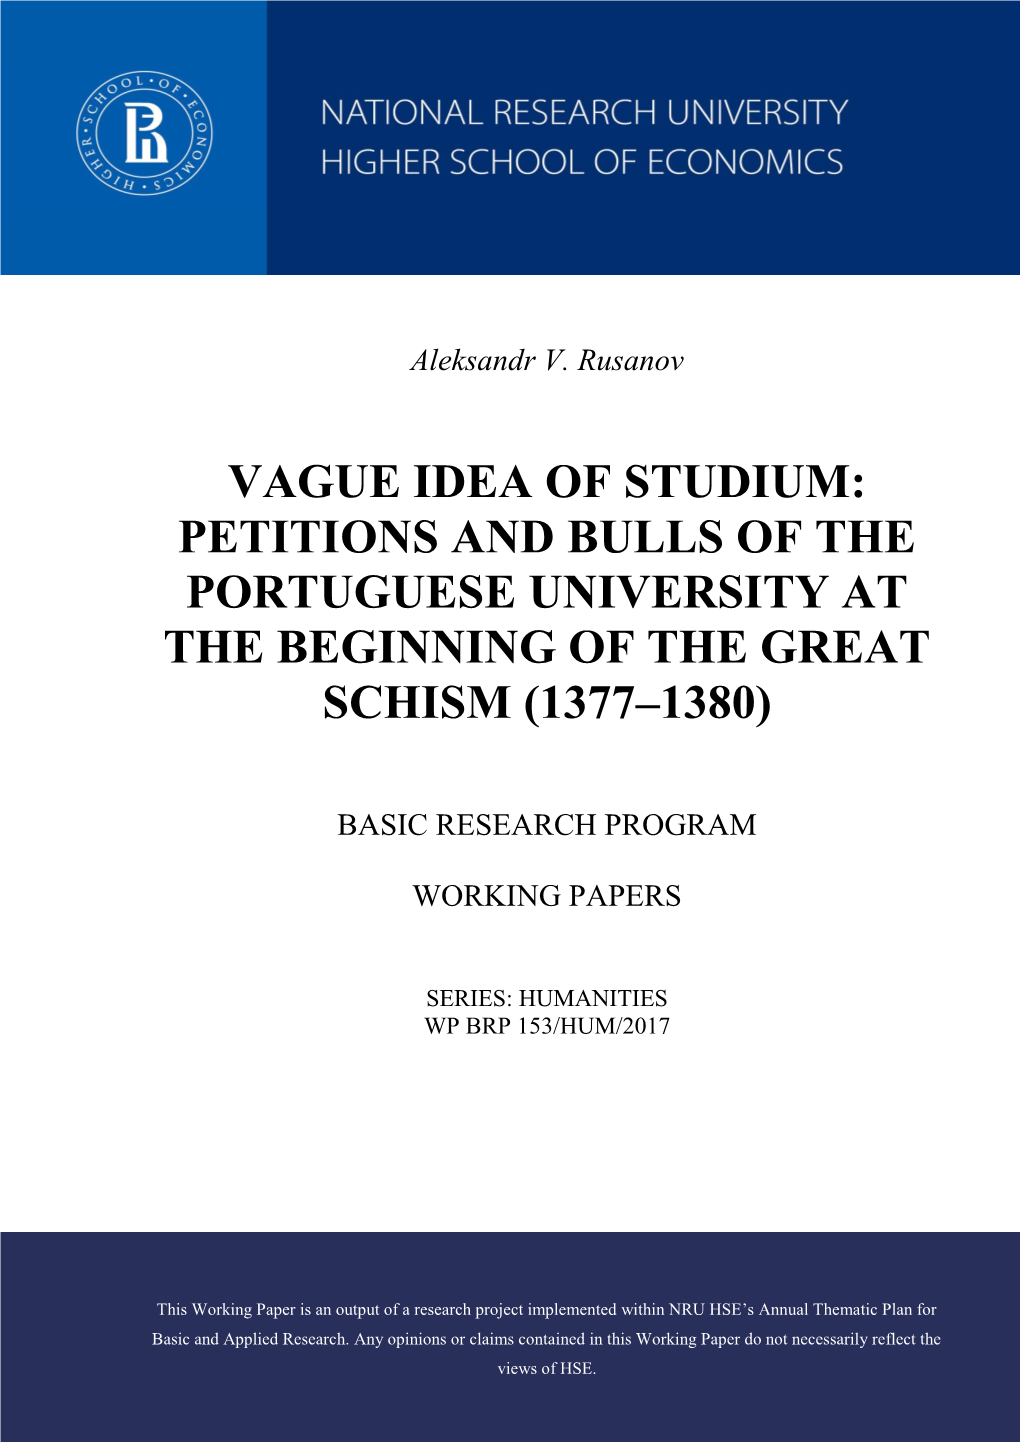 Vague Idea of Studium: Petitions and Bulls of the Portuguese University at the Beginning of the Great Schism (1377–1380)